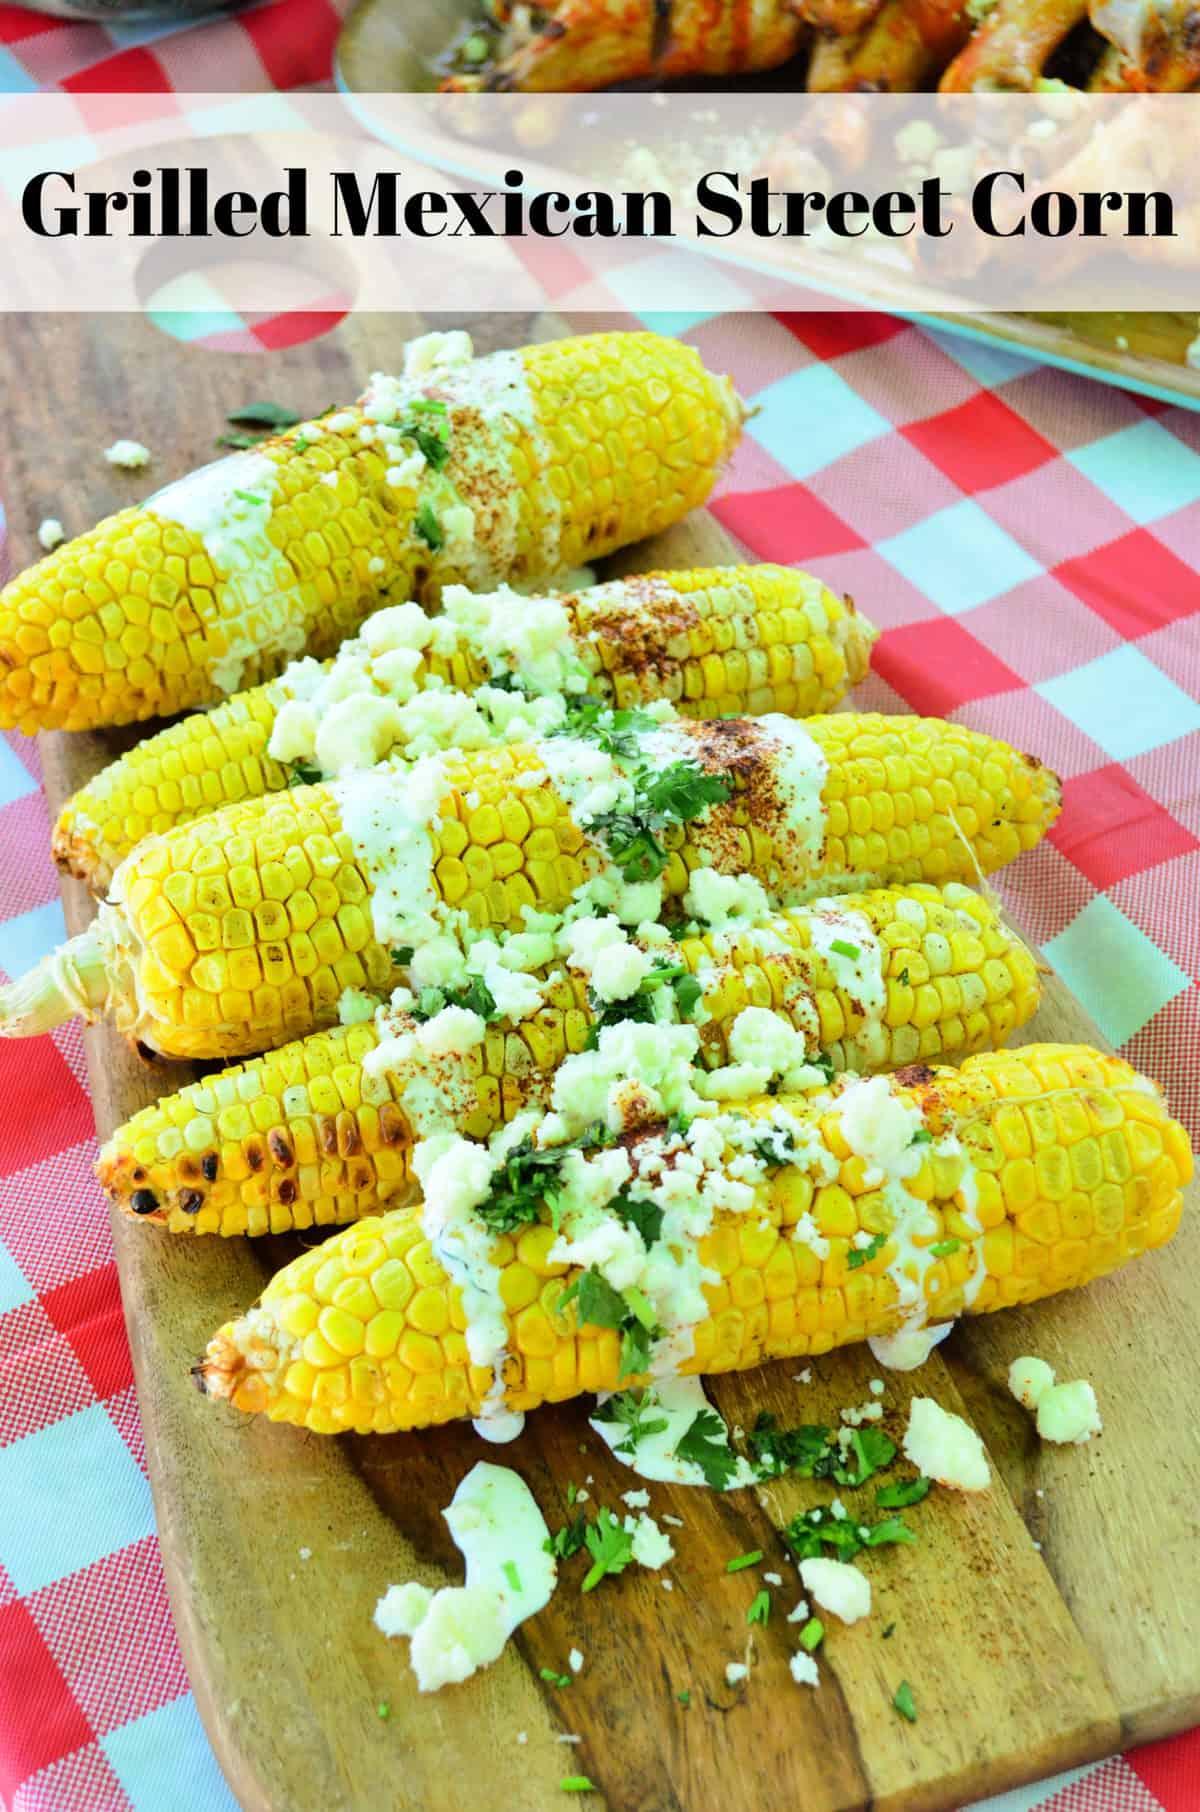 corn cobs on a board drizzled with crema, cheese crumbles, and herbs with title text.